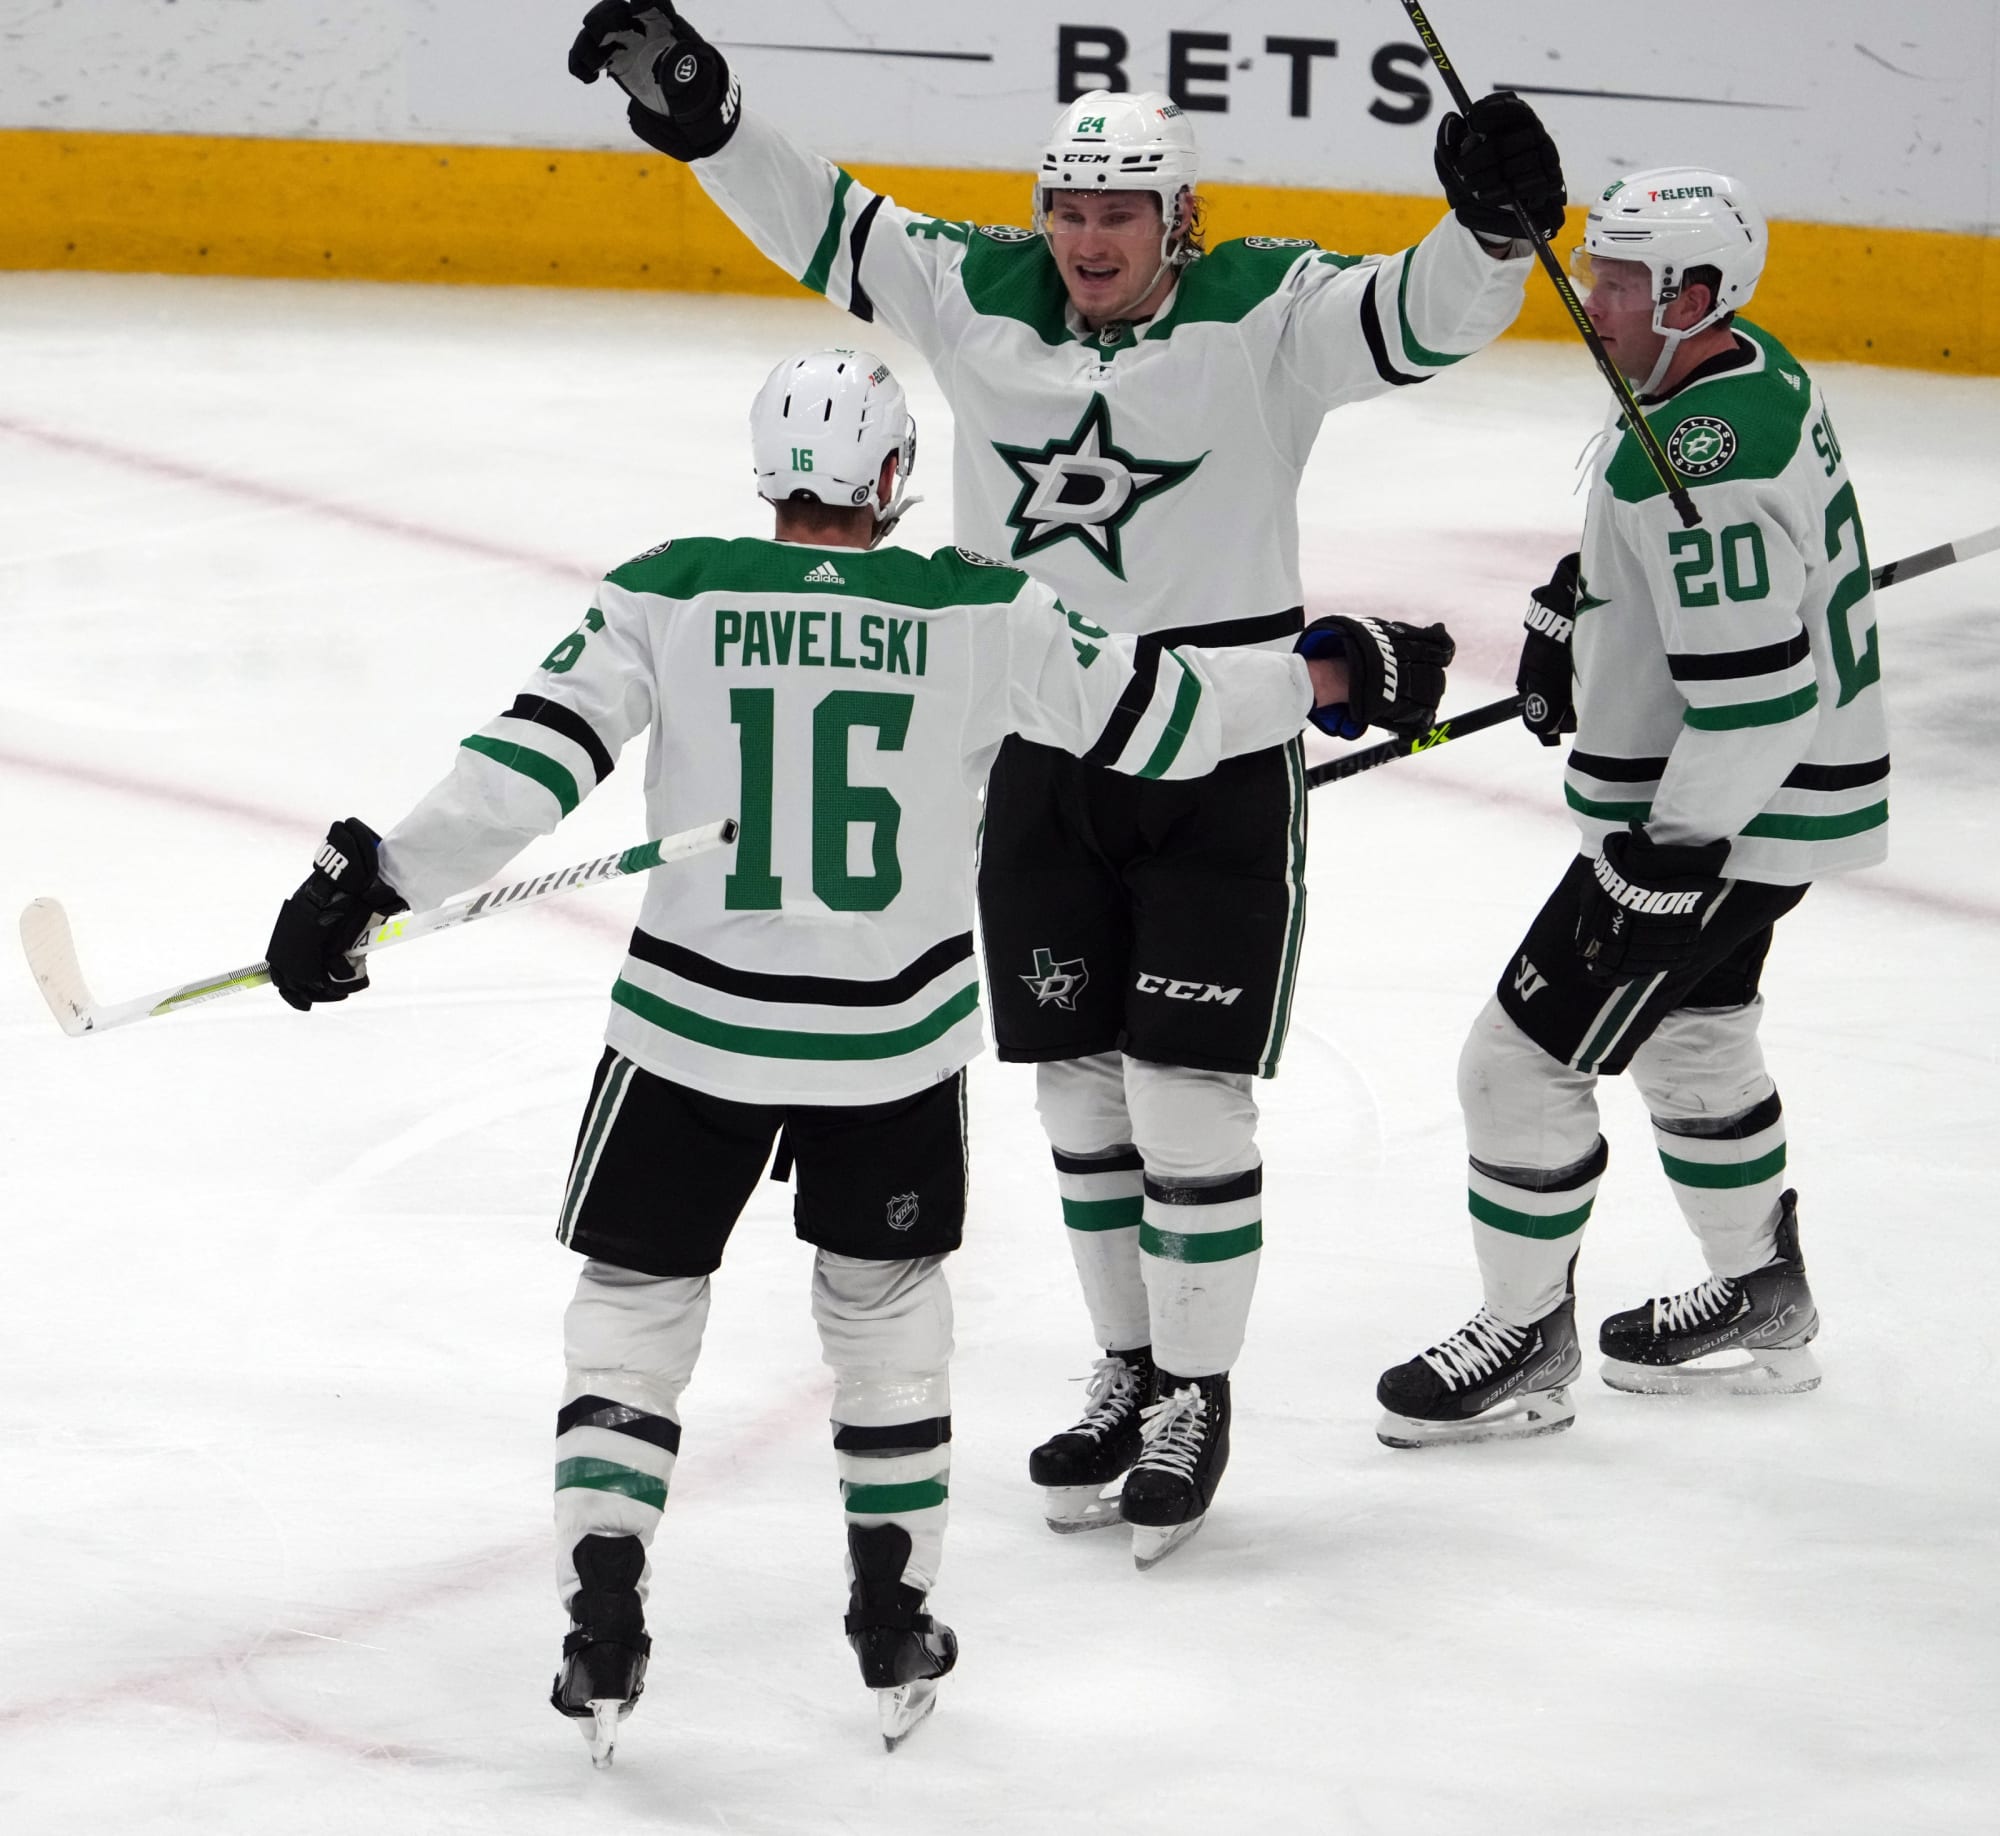 Dallas Stars can punch their ticket to the playoffs with 1 point